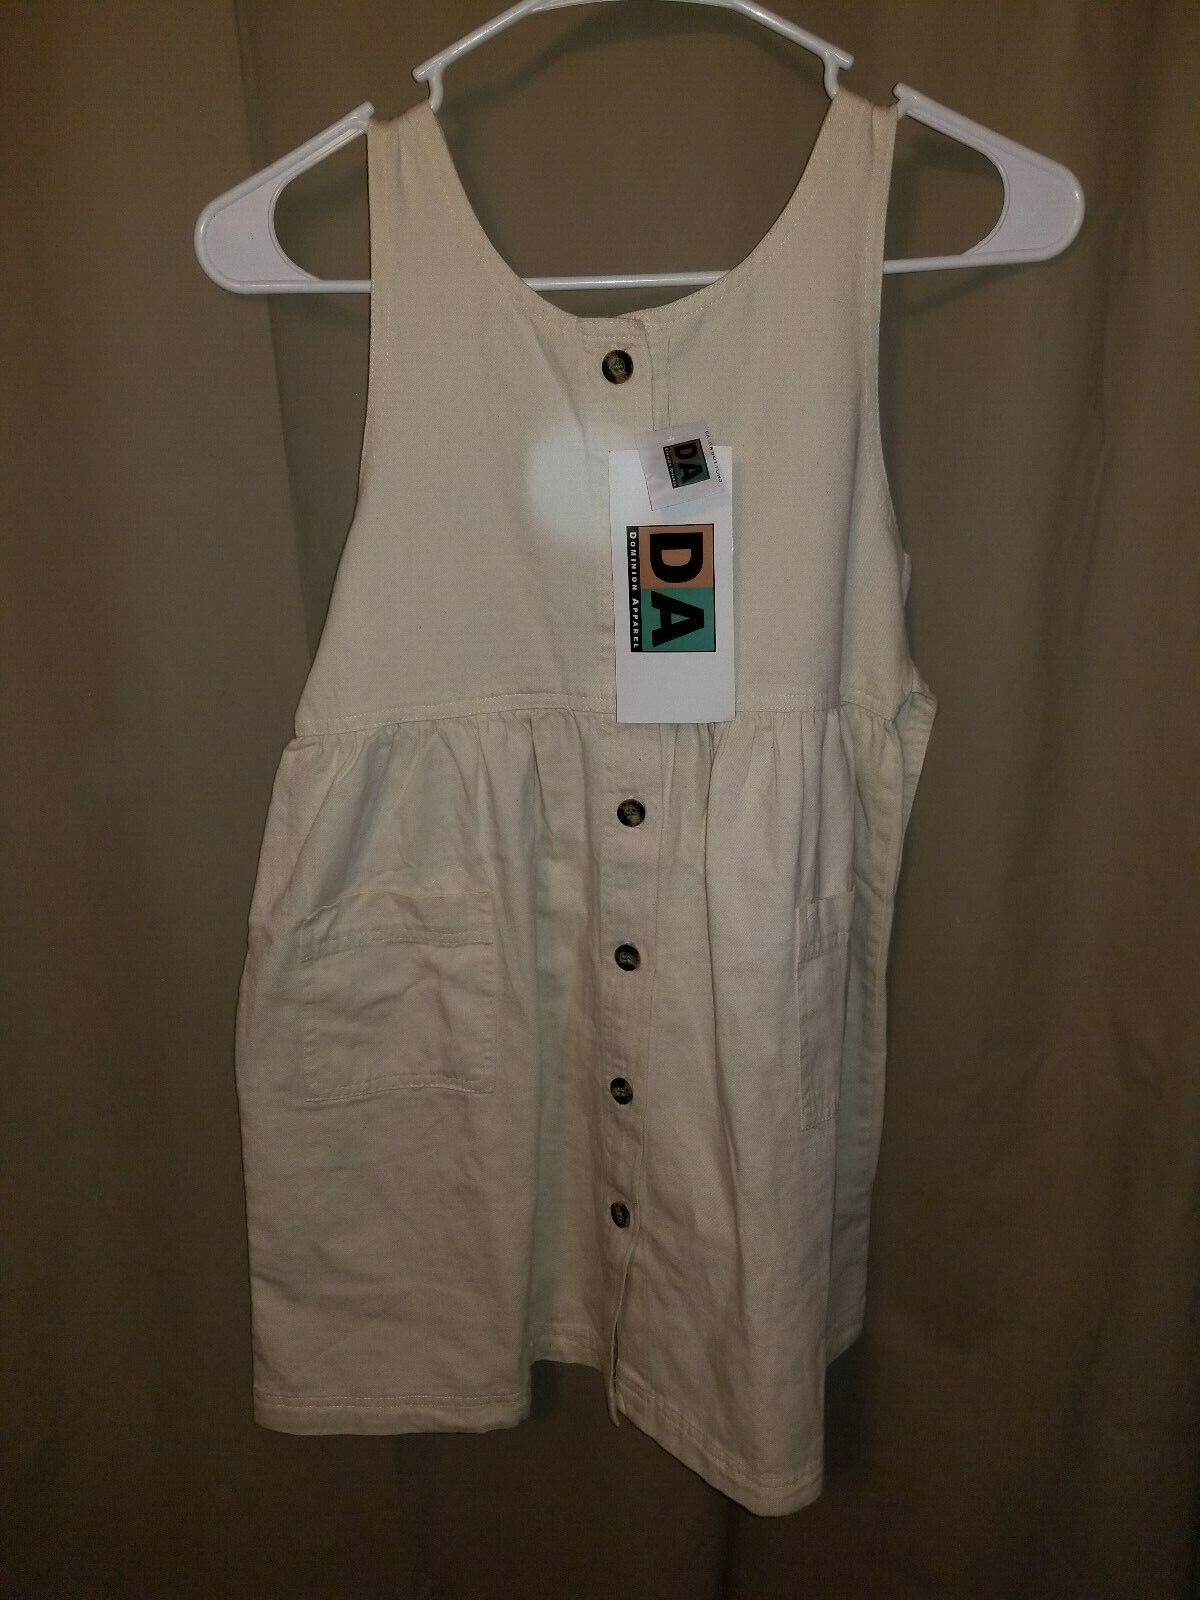 Primary image for Denim Apparel -EMBROIDERED FISH Ivory Cotton Dress  Size XL            B23